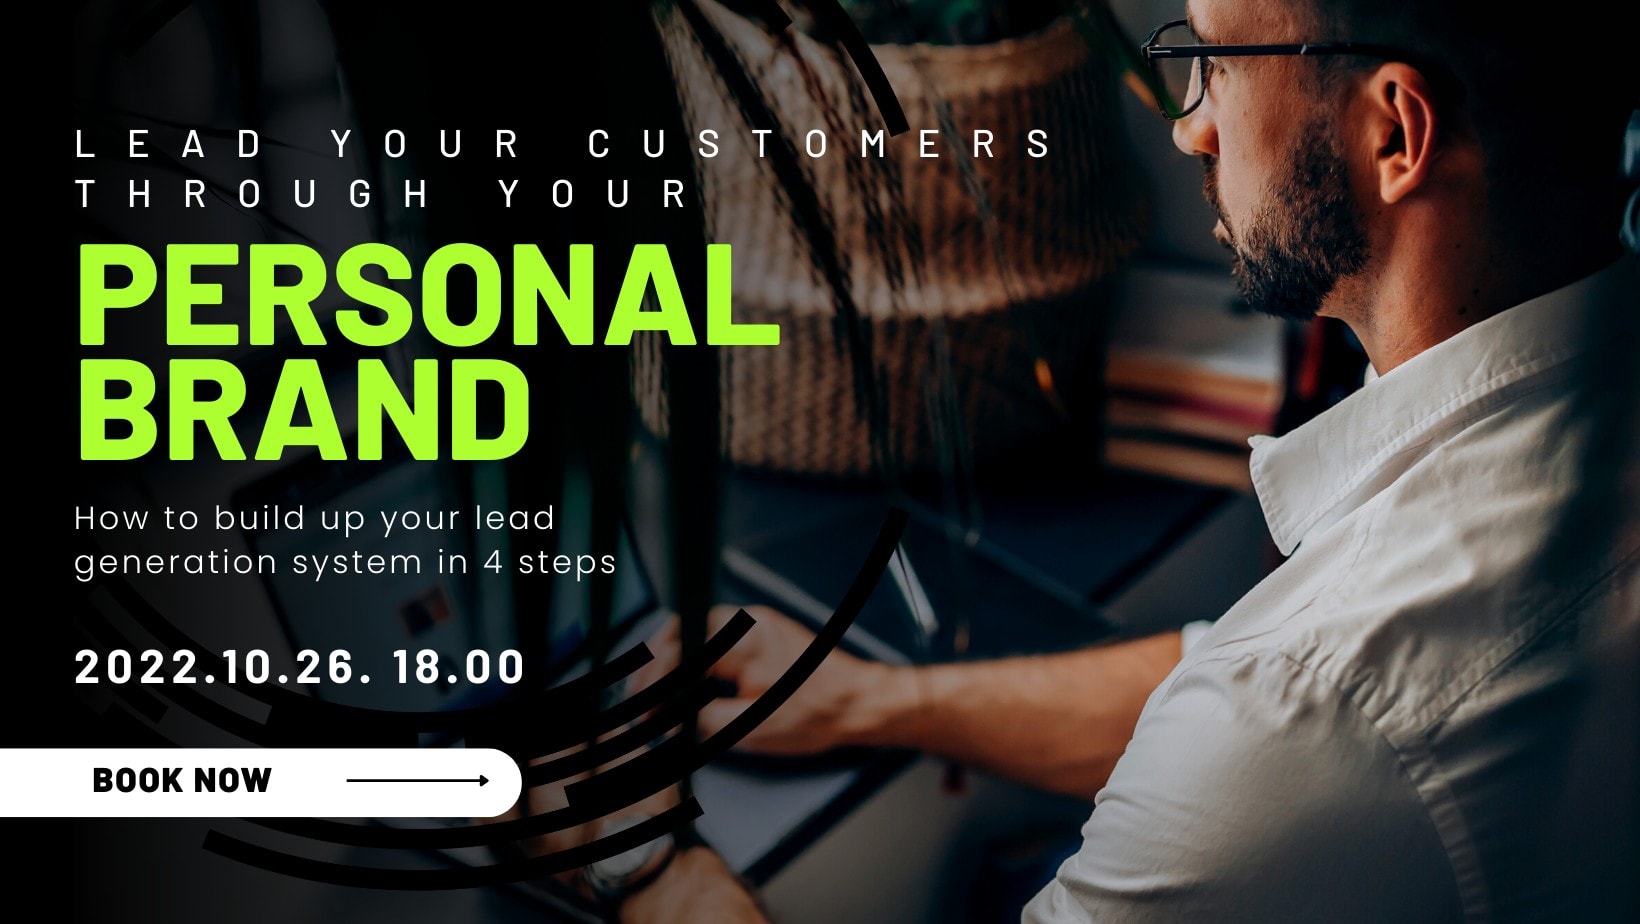 LEAD YOUR CUSTOMERS THROUGH YOUR PERSONAL BRAND 👥 26 OCT